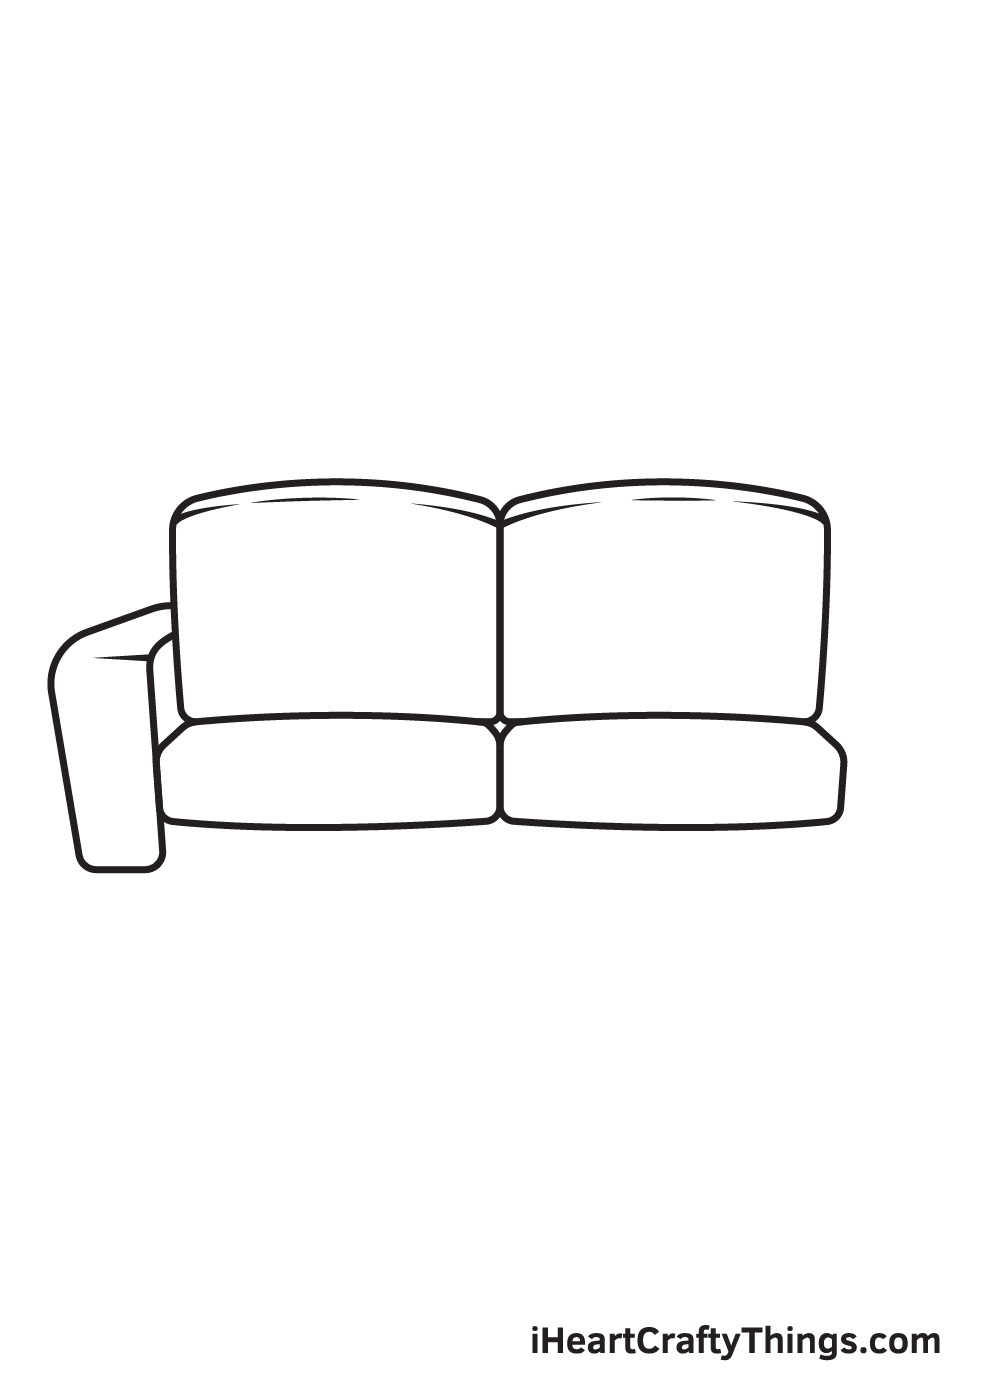 Drawing a chair - Step 5